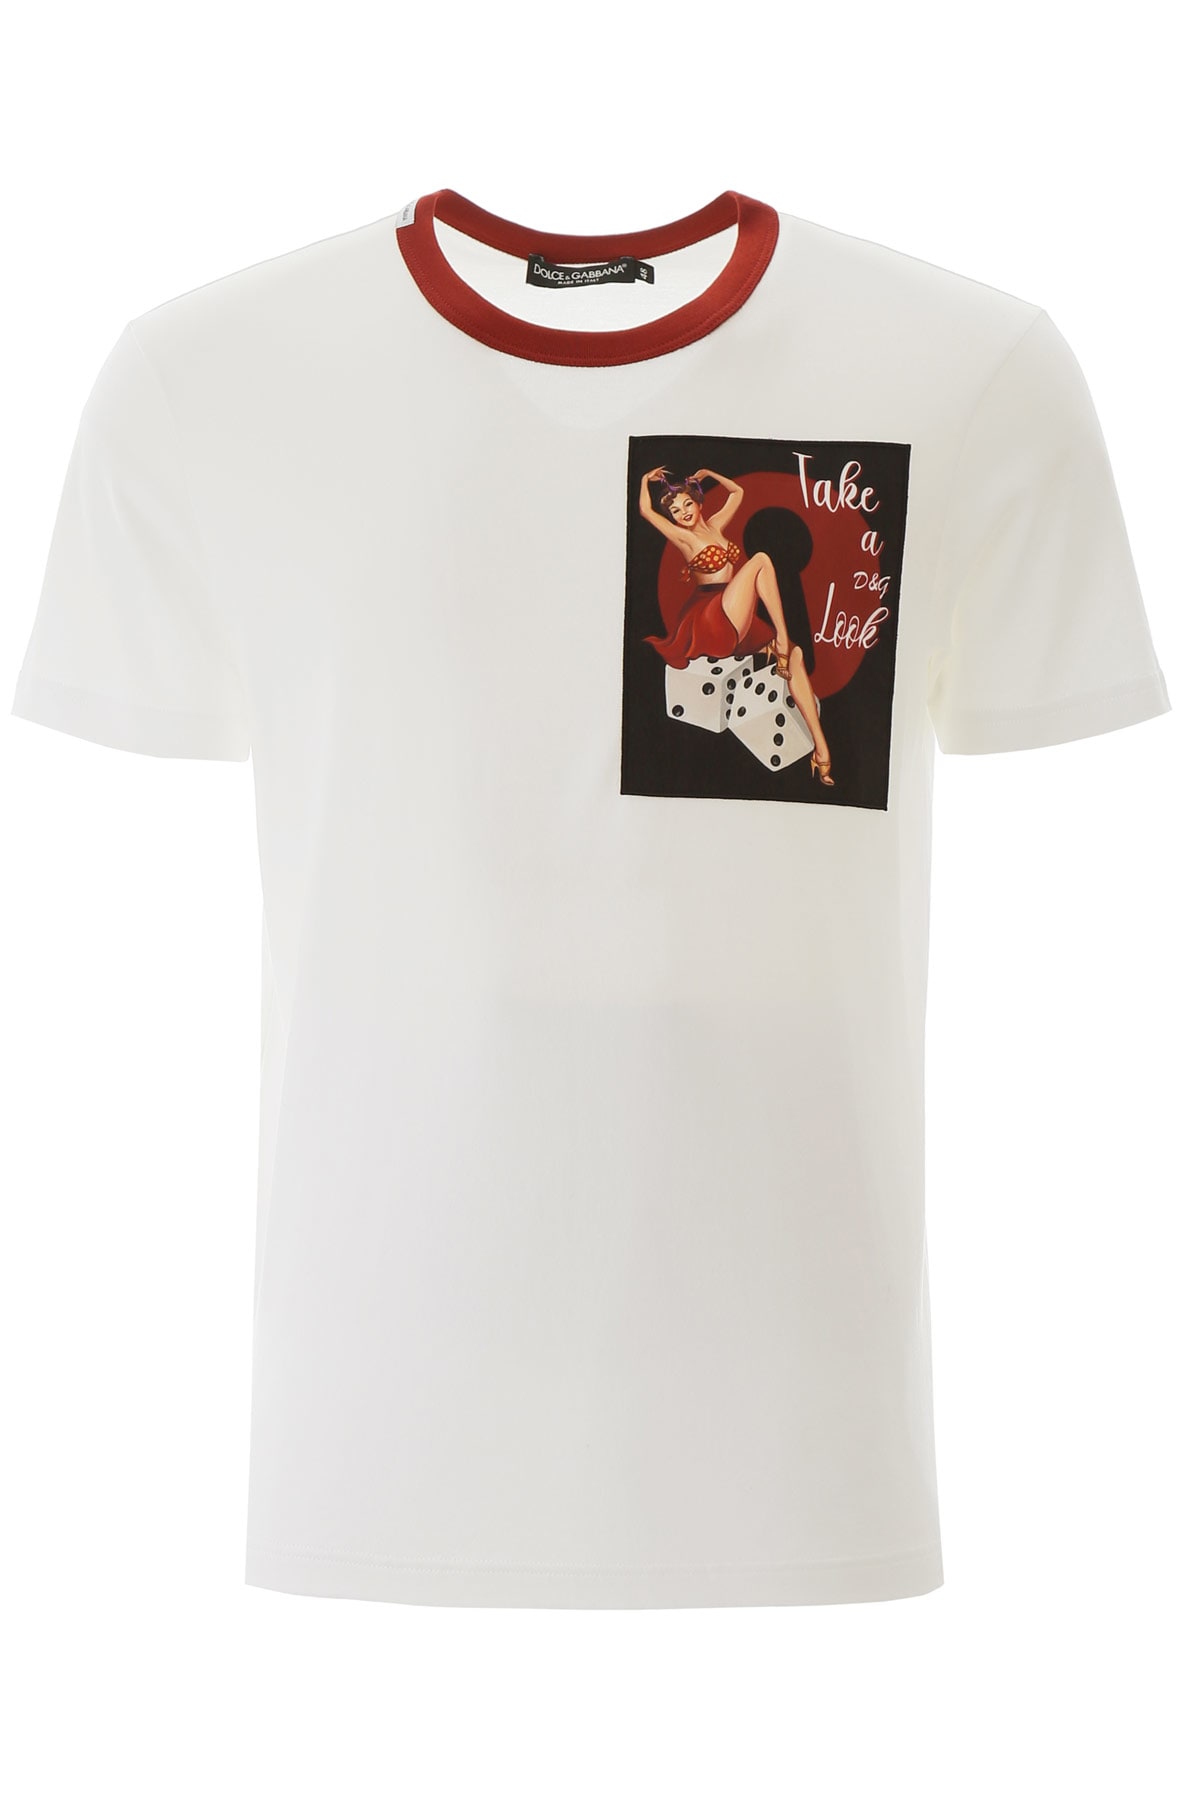 DOLCE & GABBANA T-SHIRT WITH PATCH,11291957